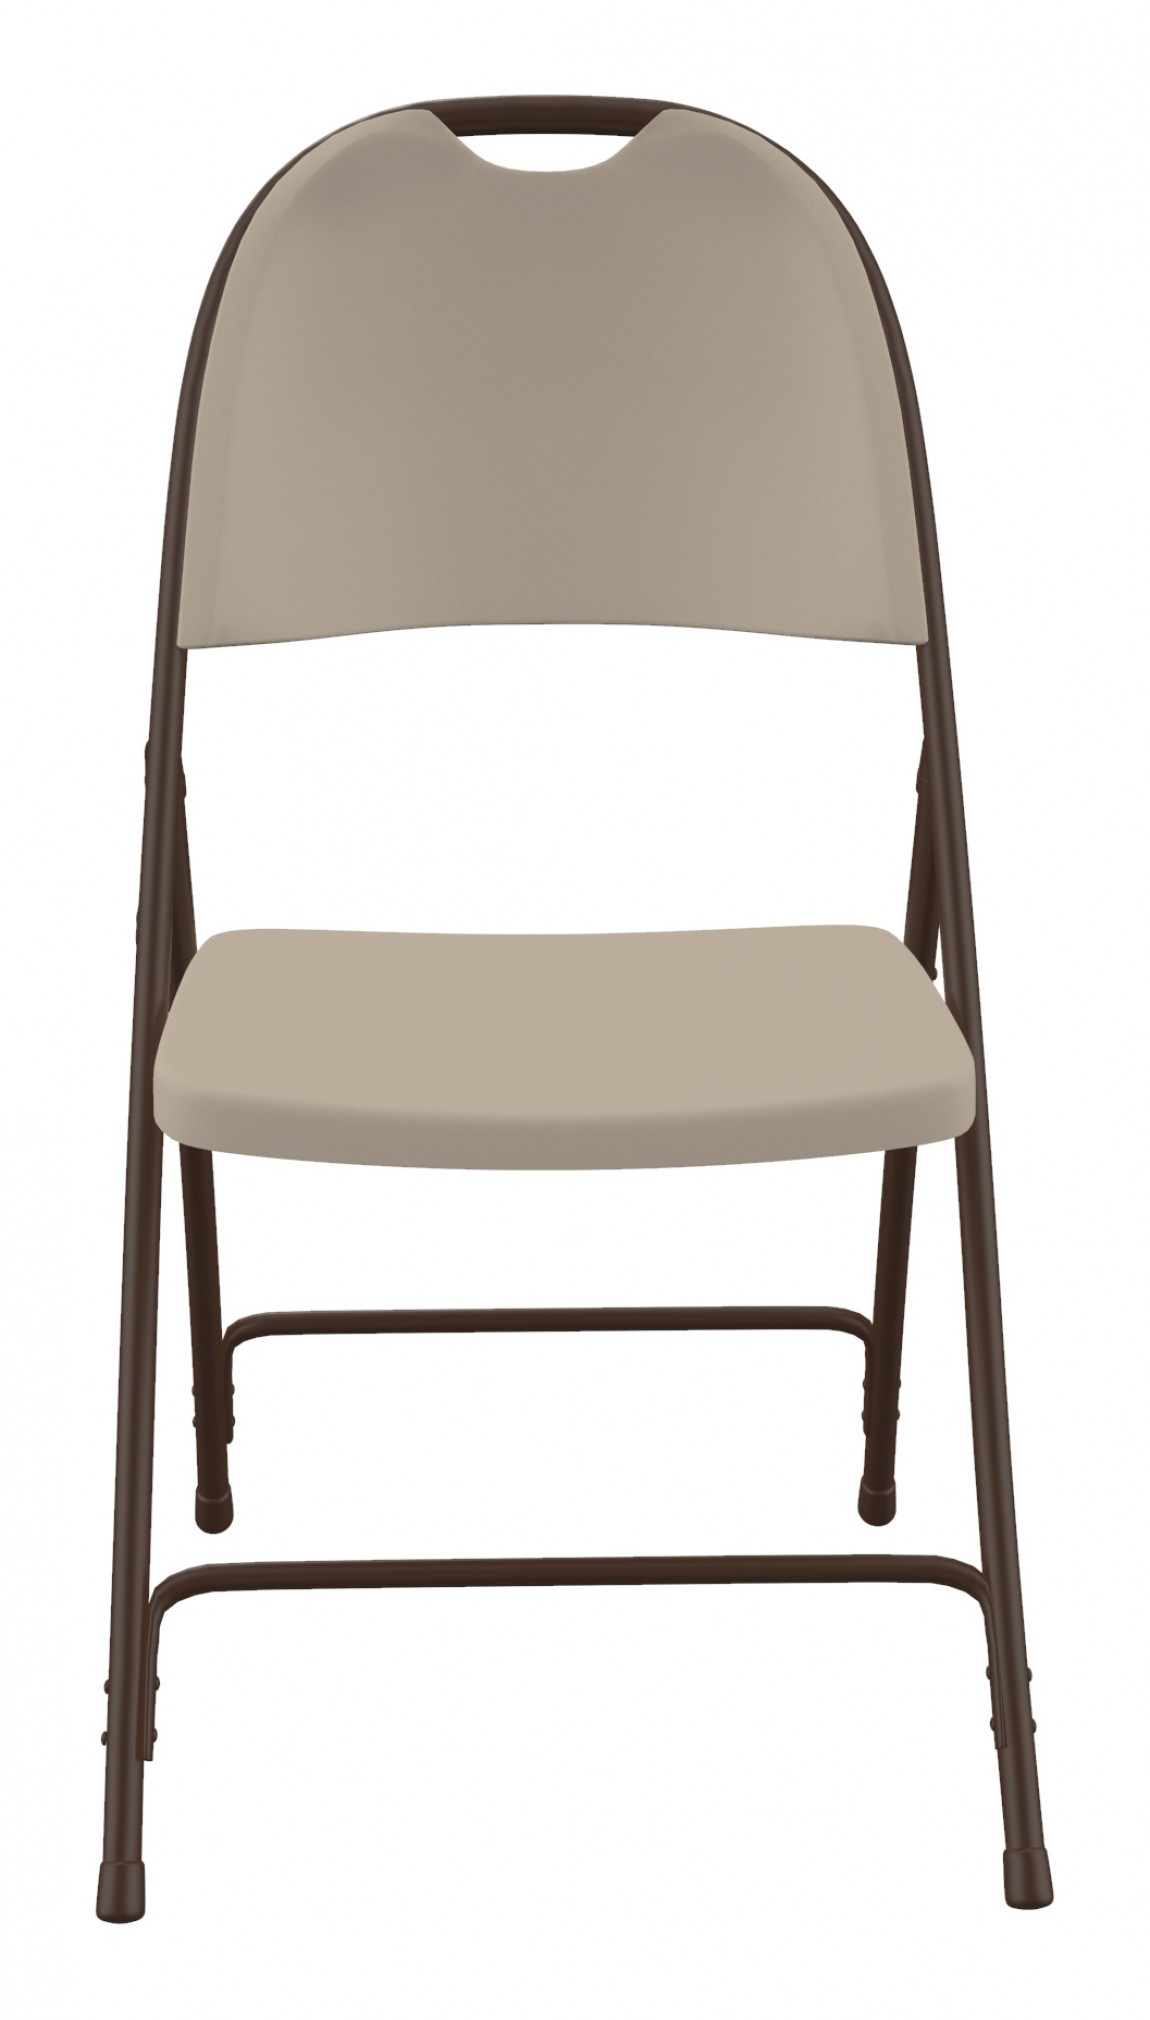 Folding Chair - 4 Pack